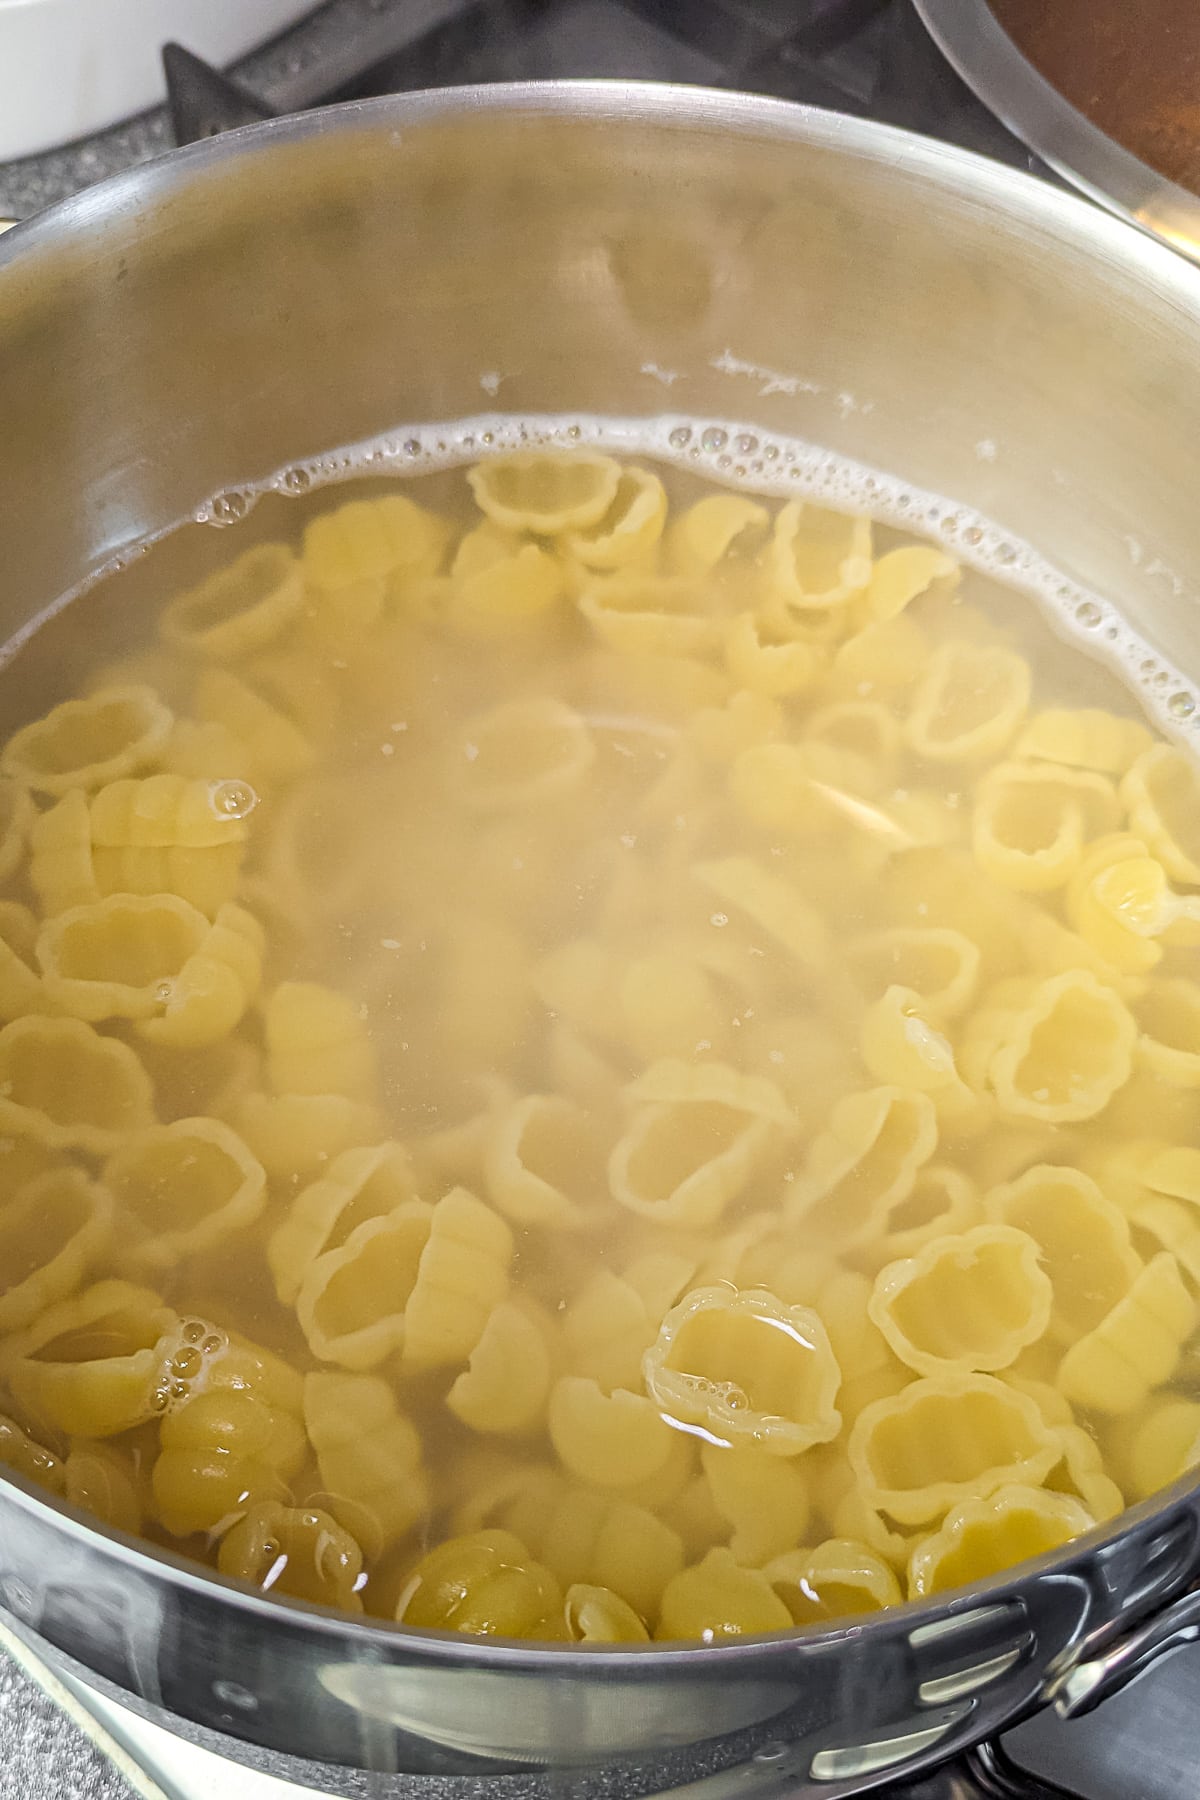 Cooking pasta shells in boiling water in a stainless steel pot.